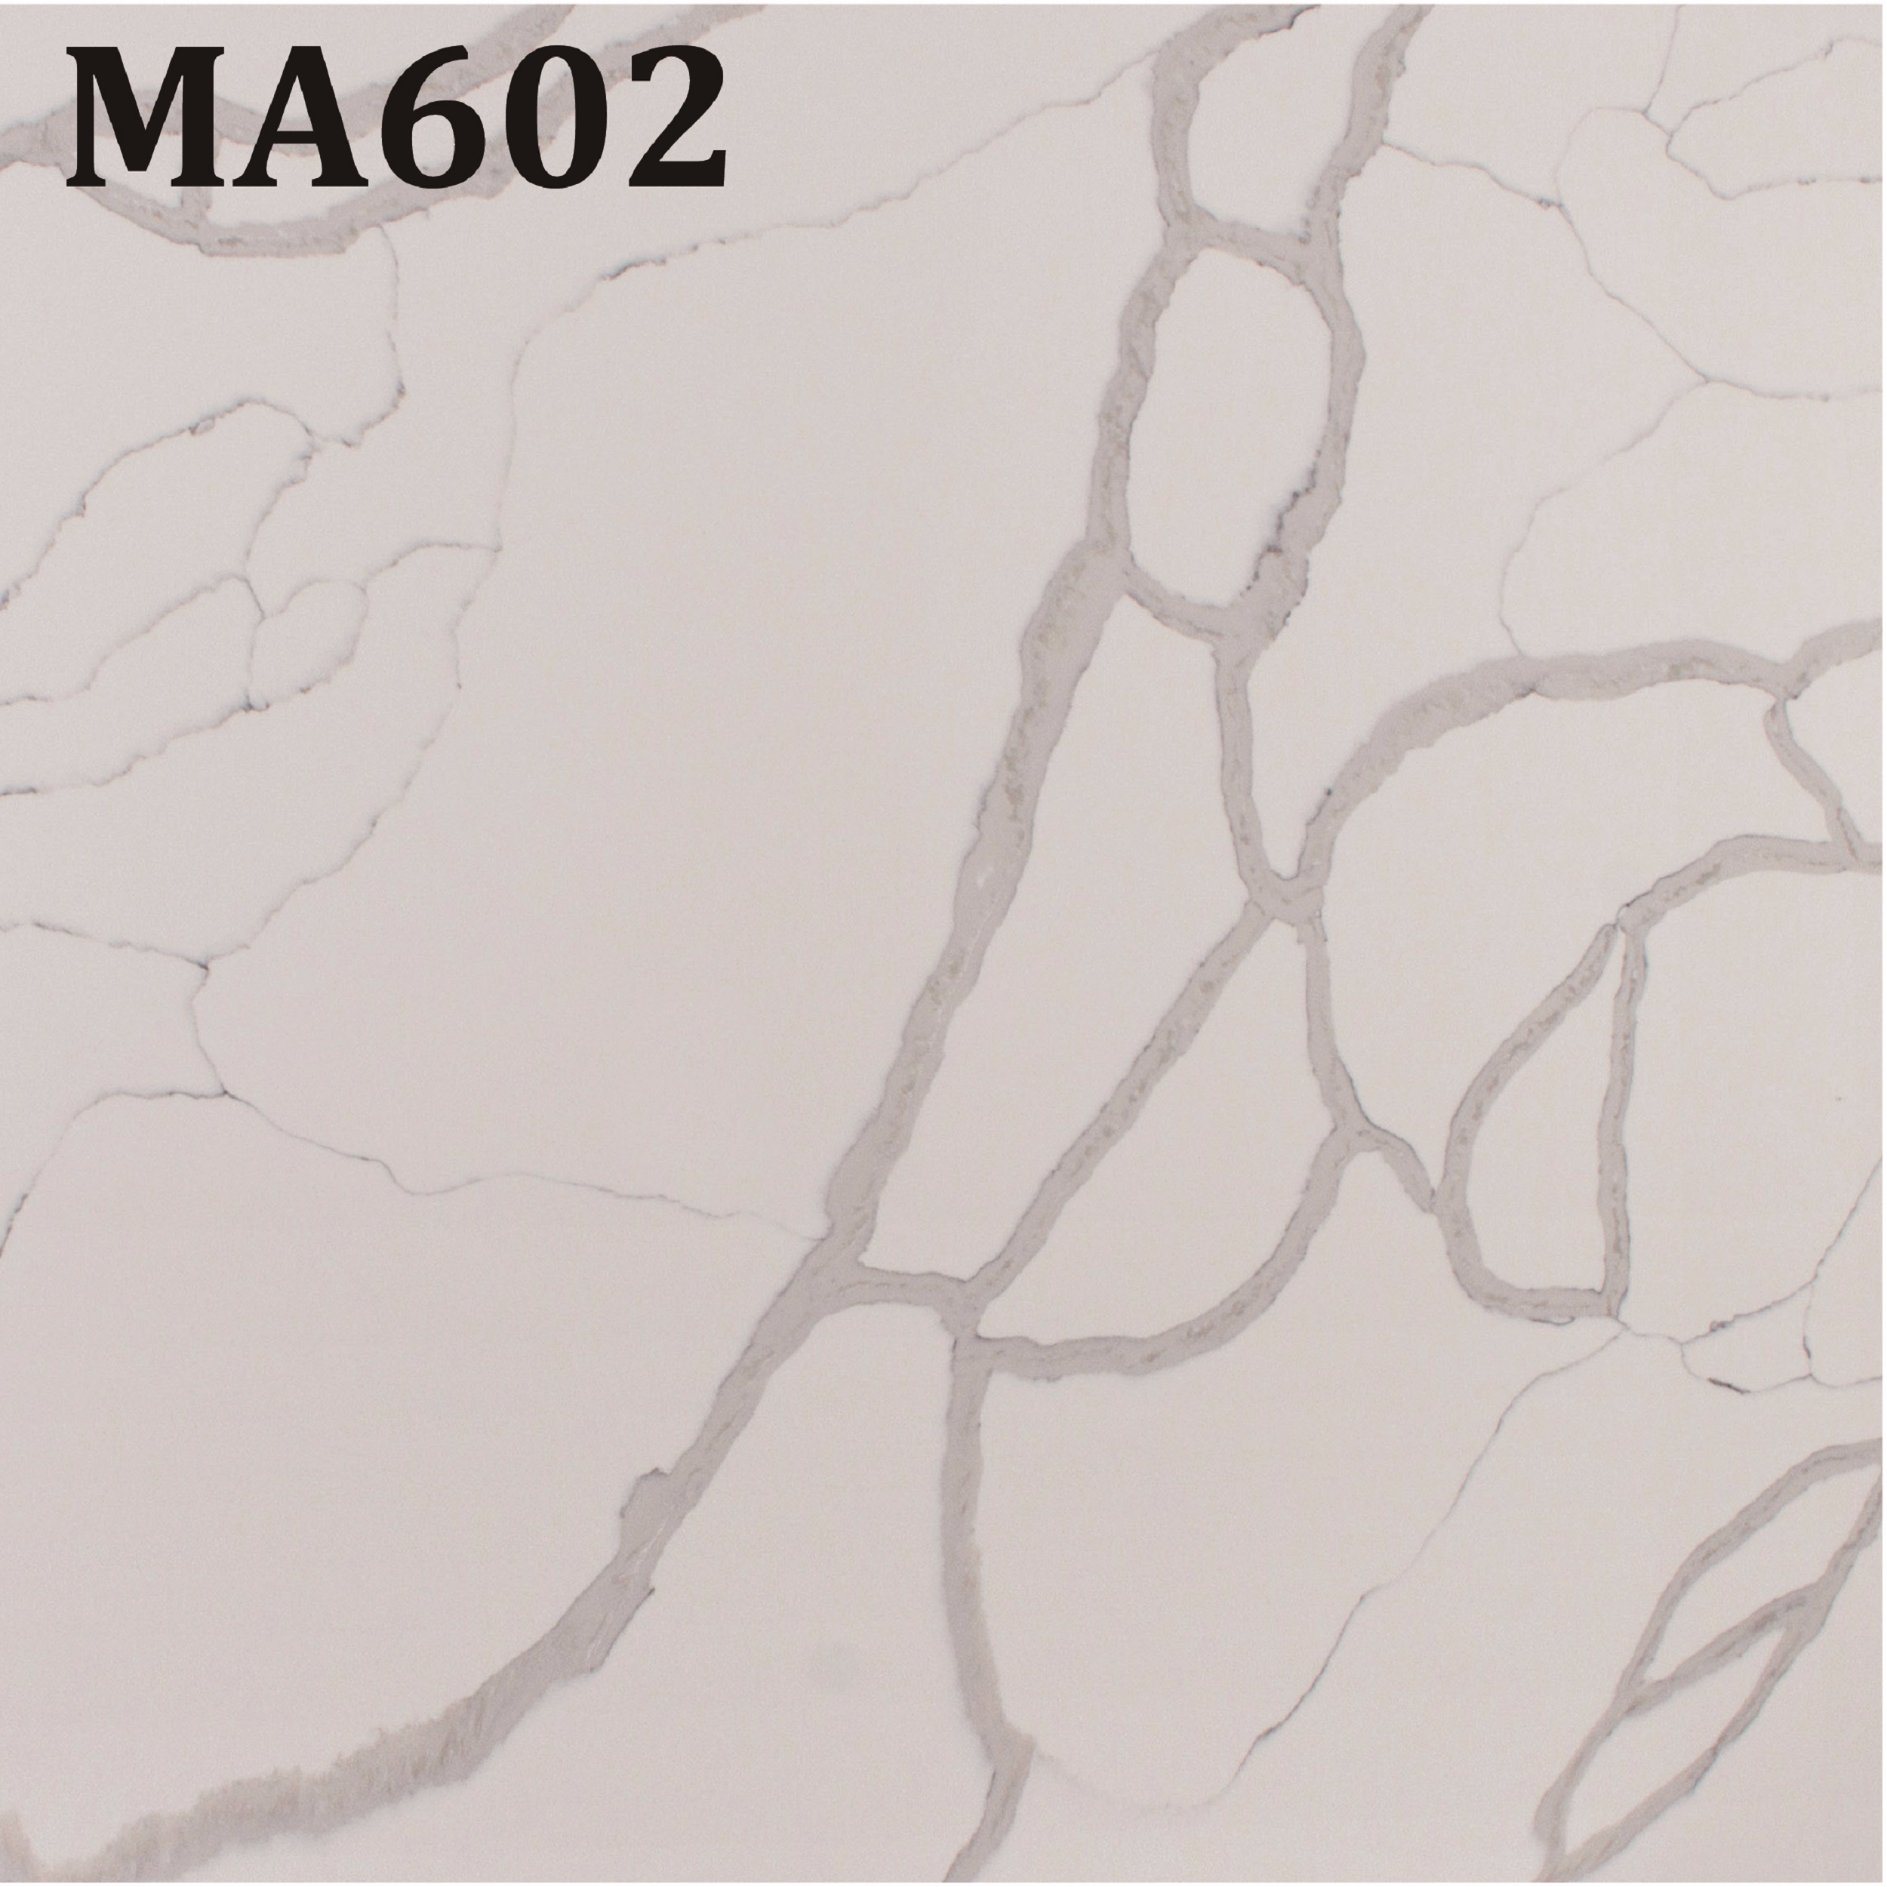 Quartz Stone for Kitchen Countertop Vanity Top with High Quality